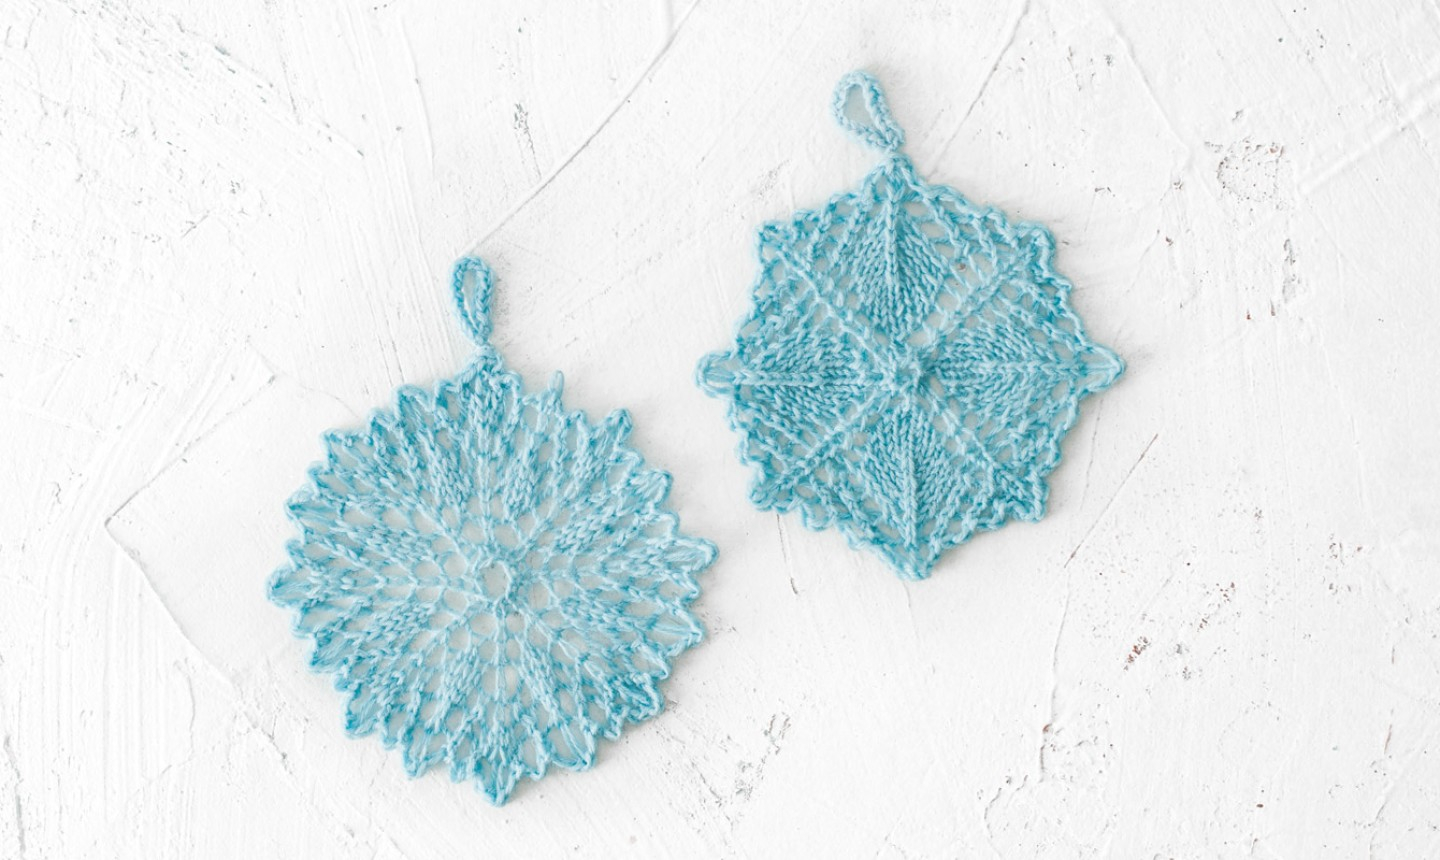 Knitted Snowflake Pattern Let It Snow With Cozy Knit Snowflakes Free Pattern Alert